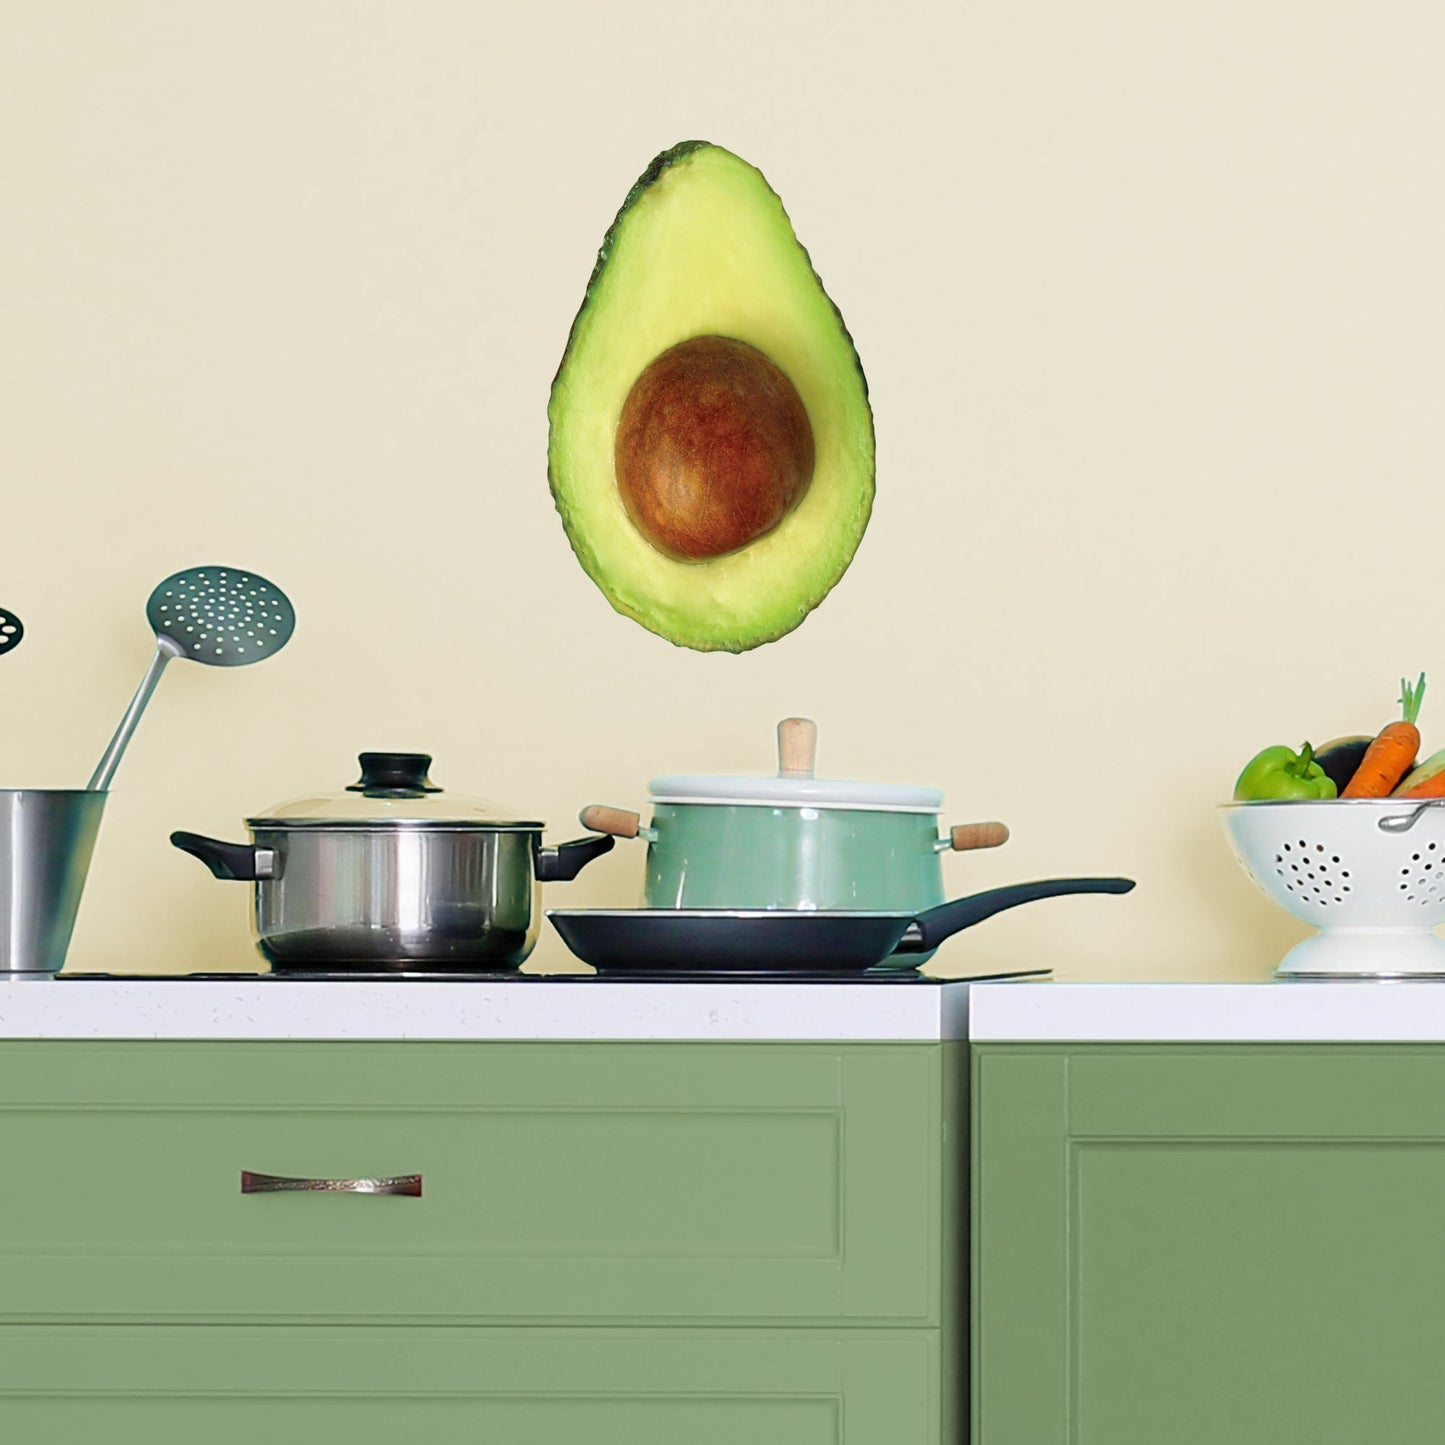 Large Avocado + 2 Decals (10"W x 15"H)